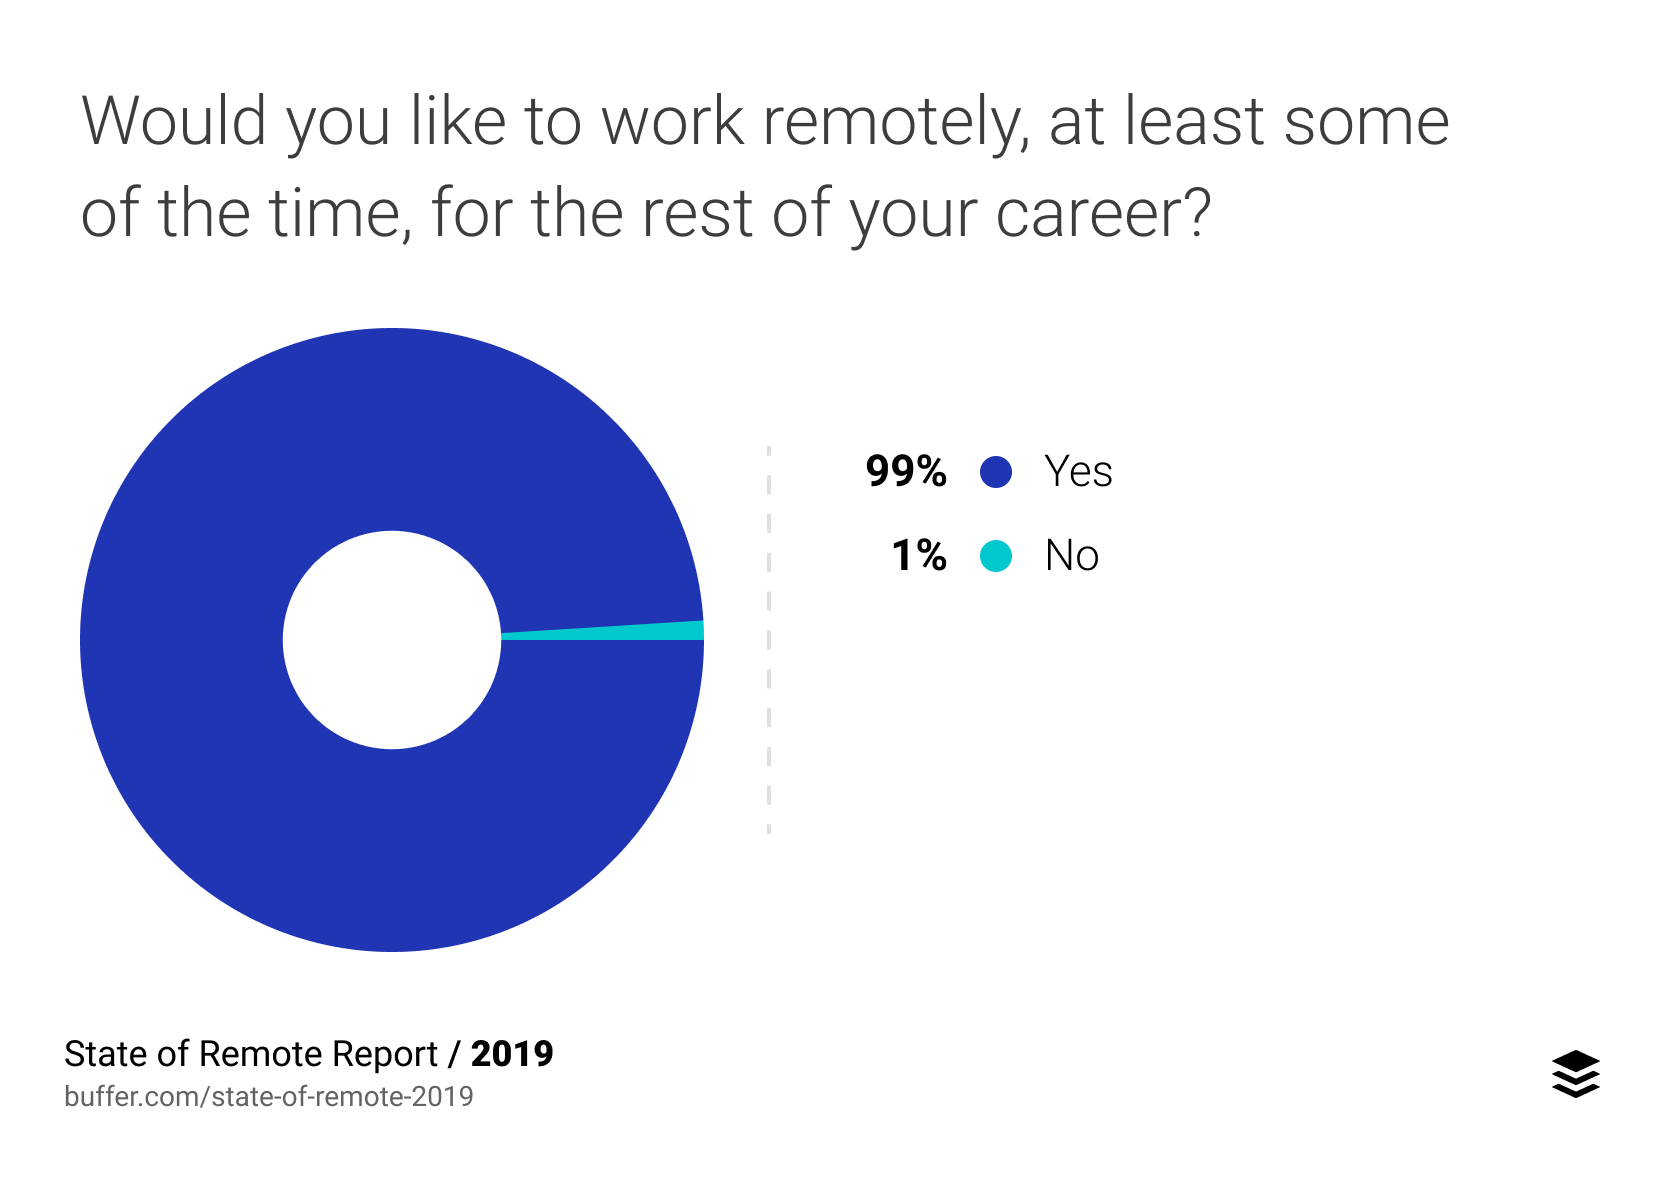 Employees want the option of working remotely